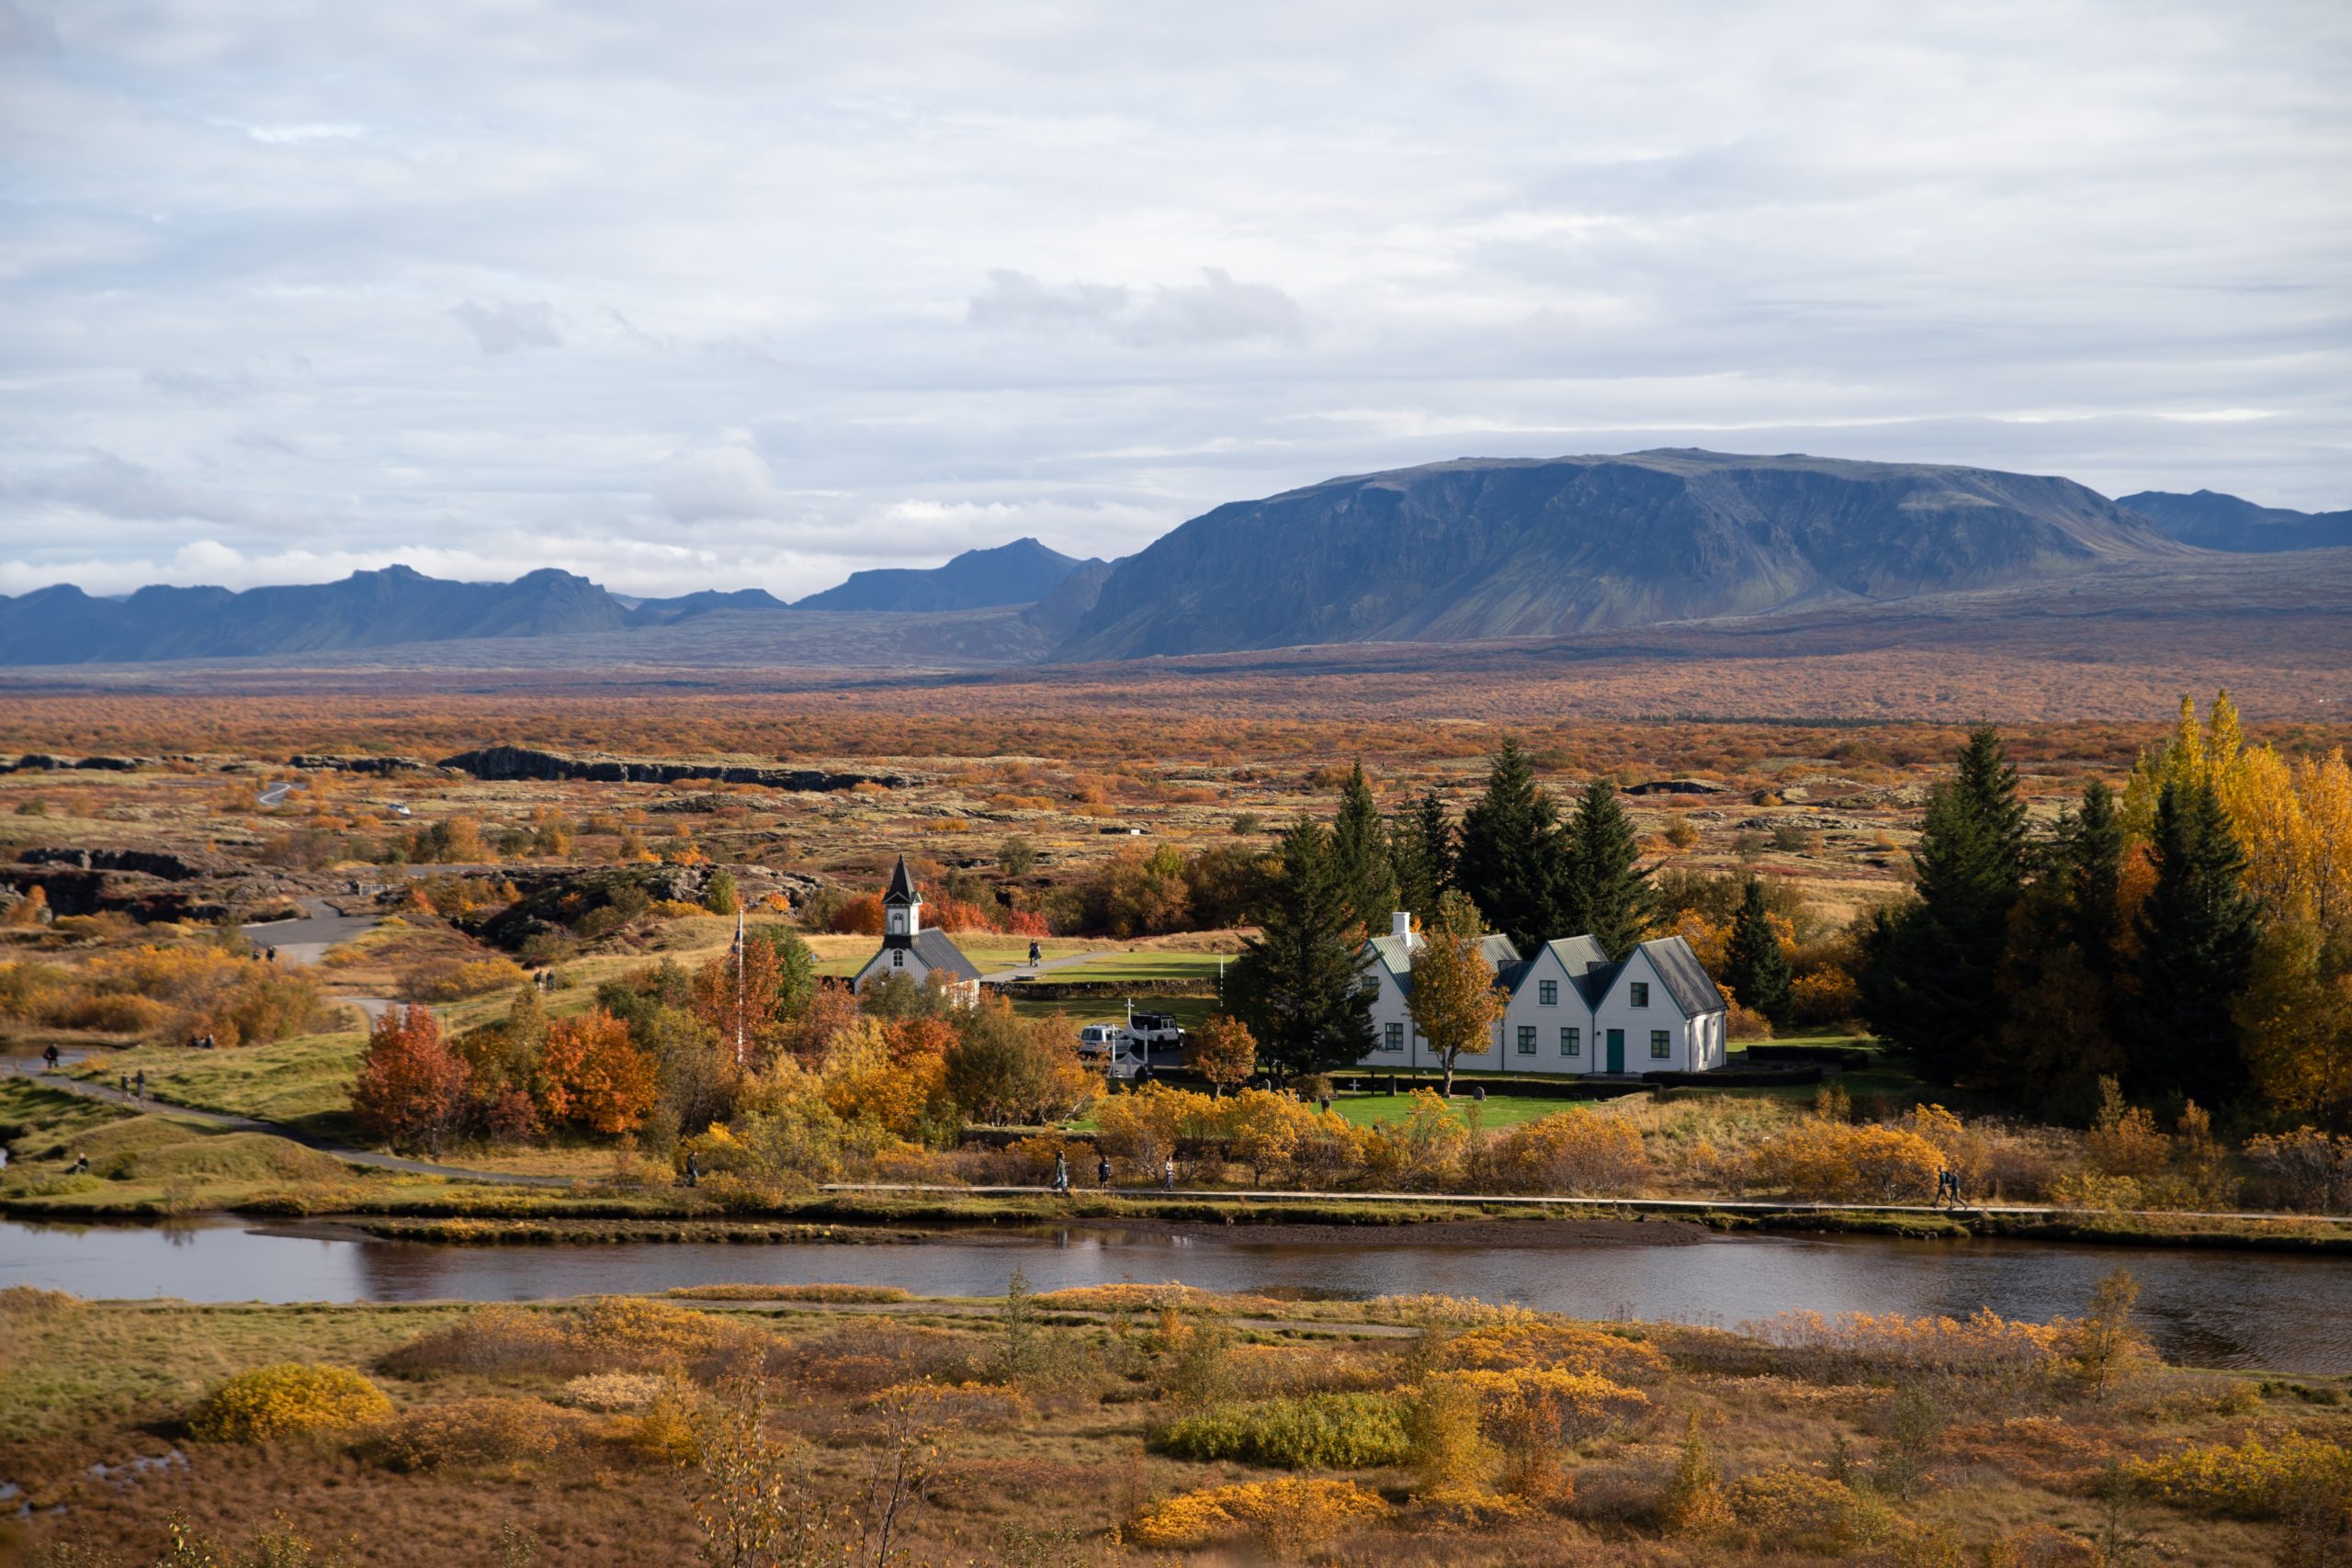 Looking out over Thingvellir National Park on the Golden Circle route